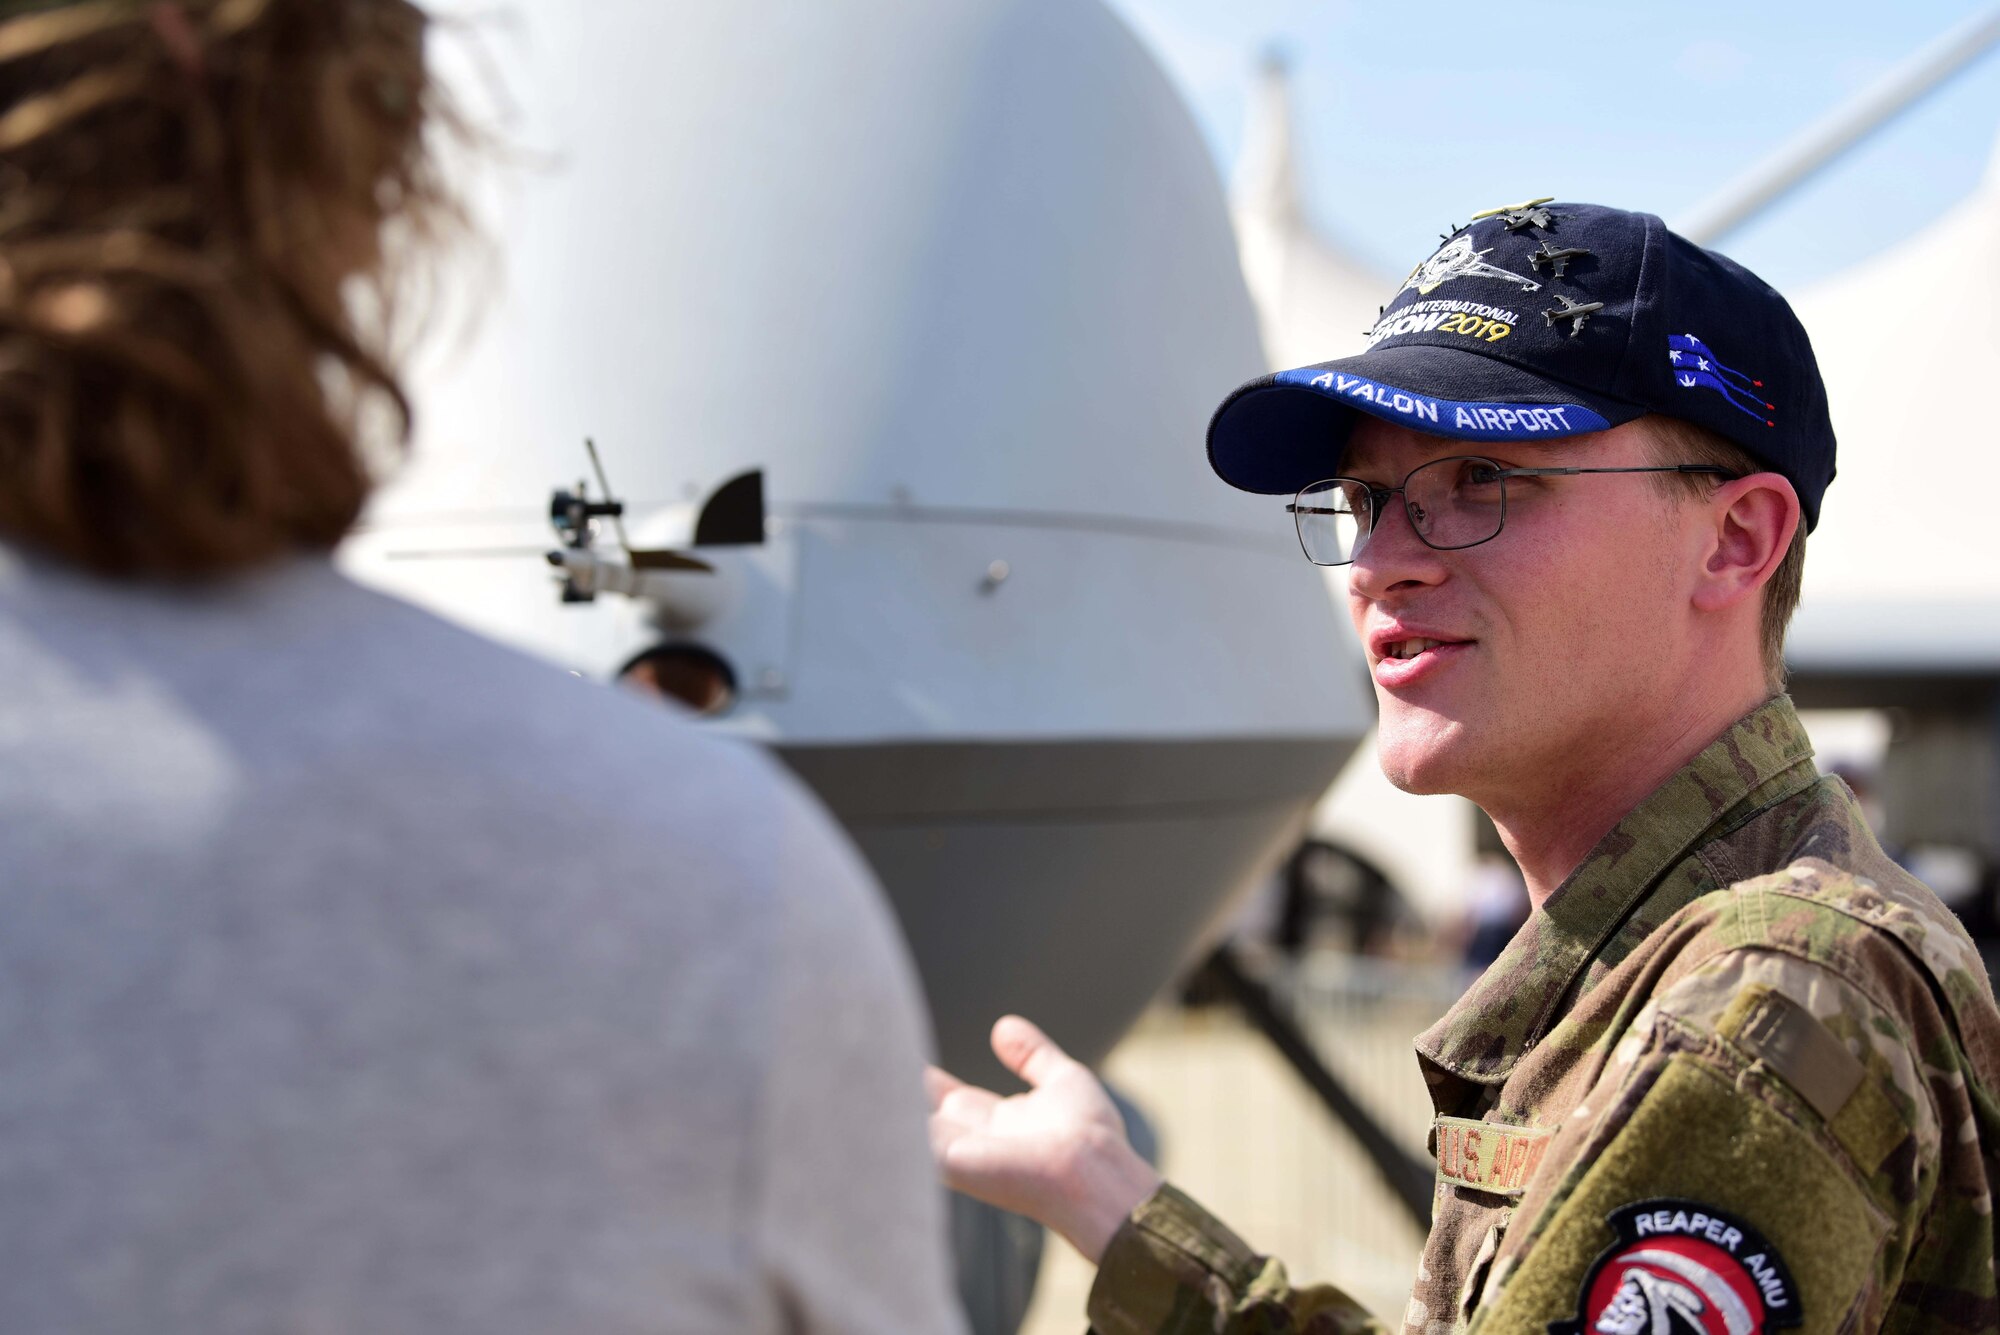 Staff Sgt. Dylan, MQ-9 Reaper avionics craftsman, explains the effects of taking the cockpit out of the aircraft to an airshow attendee during the Australian International Airshow, Mar. 3, 2019, in Geelong, Victoria, Australia. Over the week, the crews met with many of the airshow’s more that 200,000 visitors and aviation fans. (U.S. Air Force photo by Airman 1st Class Haley Stevens)